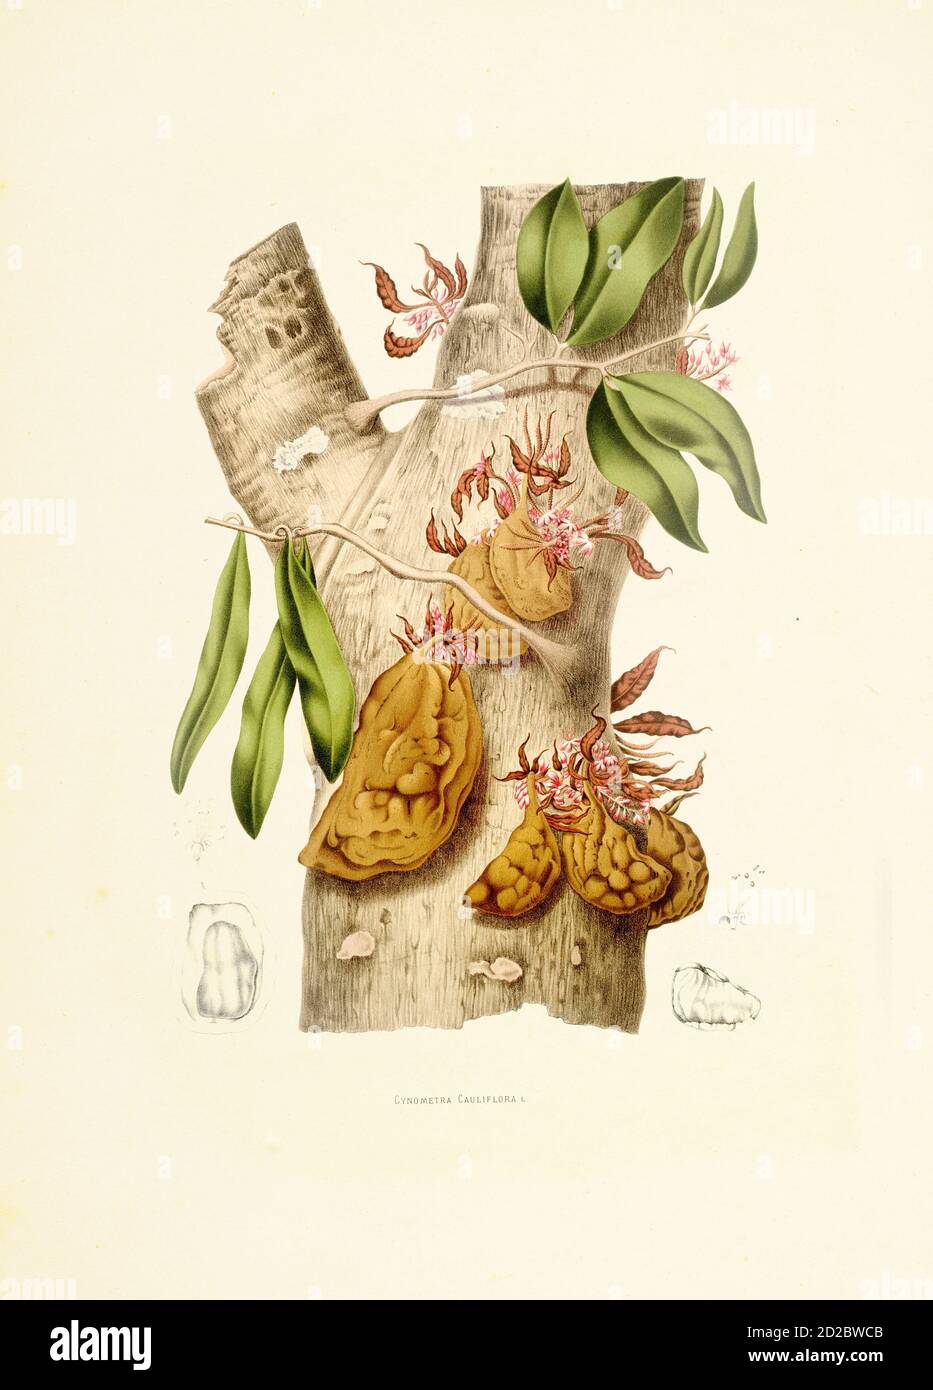 Antique 19th-century engraving of a cynometra cauliflora, also known as nam-nam. Illustration by Berthe Hoola van Nooten from the book Fleurs, Fruits Stock Photo